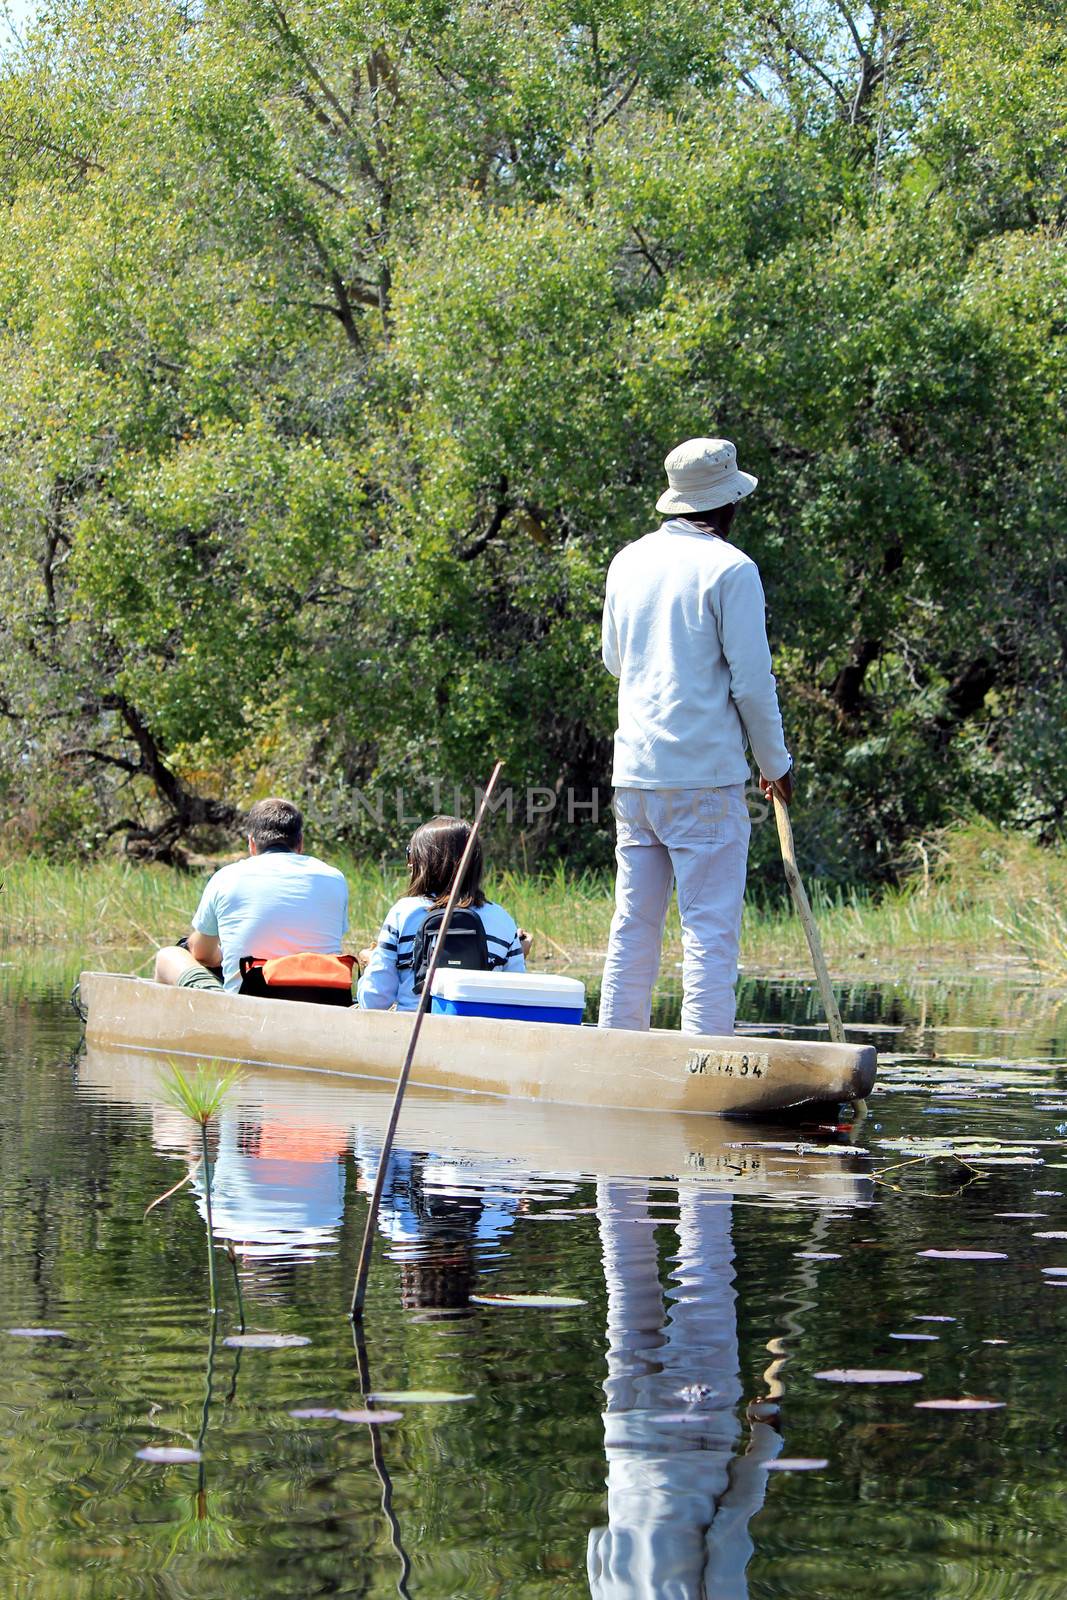 Ride in a traditional Okavango Delta mokoro canoe, through the reed covered water. North of Botswana.